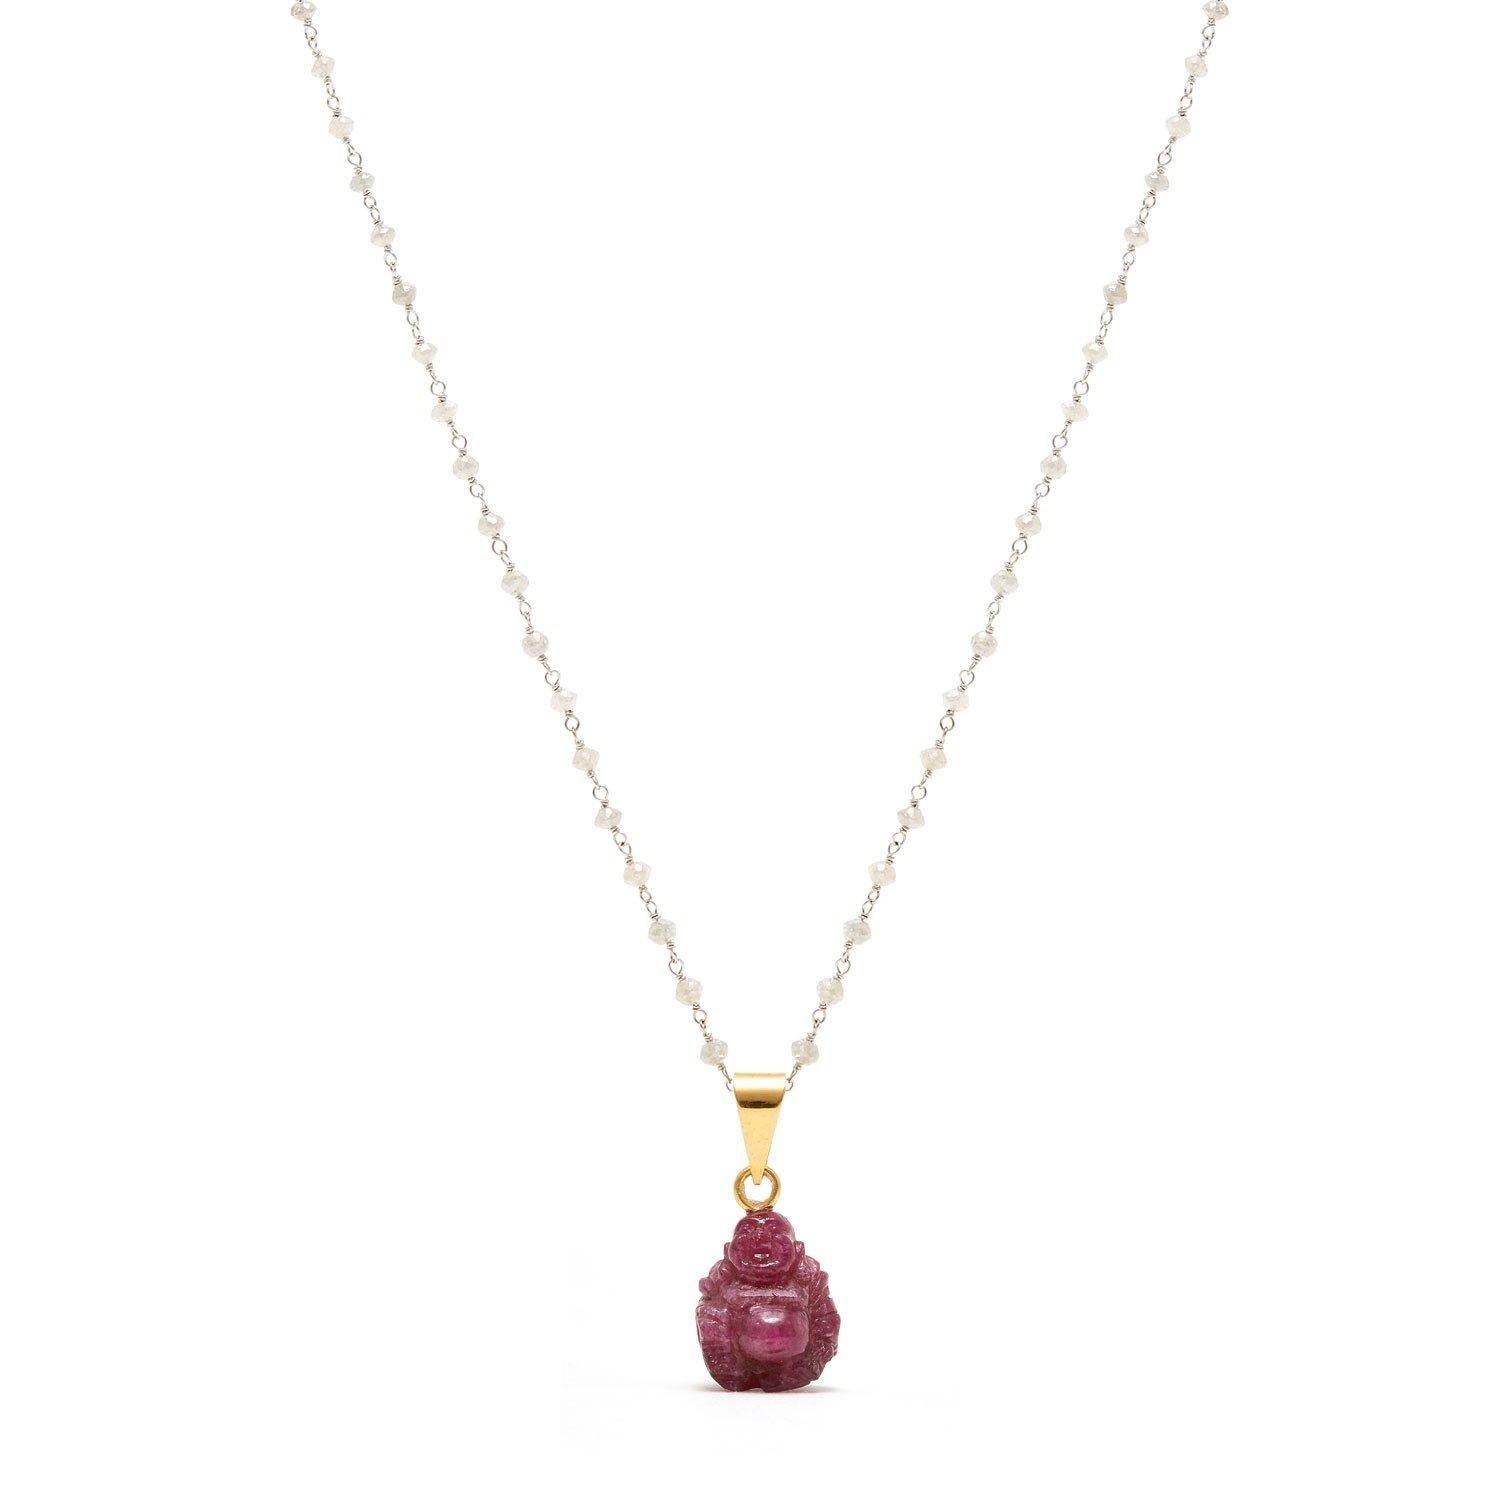 A ruby cabochon Buddha with an 18 karat gold jump ring suspended on a white diamond chain.

- Ruby karat weight is 22.05 karats 
- White diamond beads and 18 karat gold chain length 18 inches